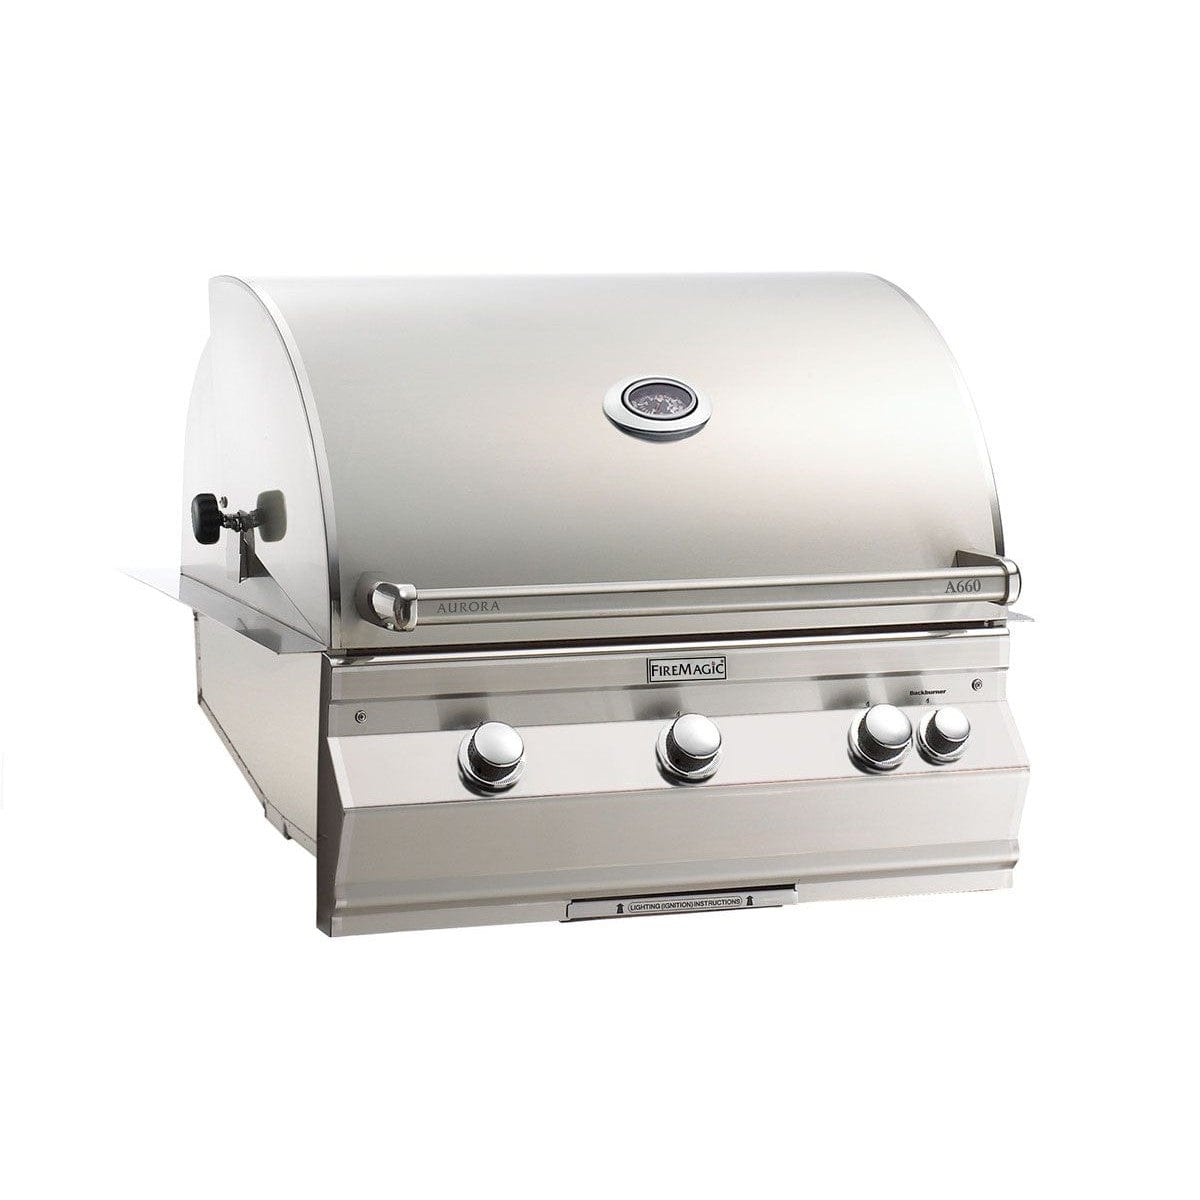 Firemagic Grills Fire Magic Aurora A660i Built-In Grill with Analog Thermometer / A660i